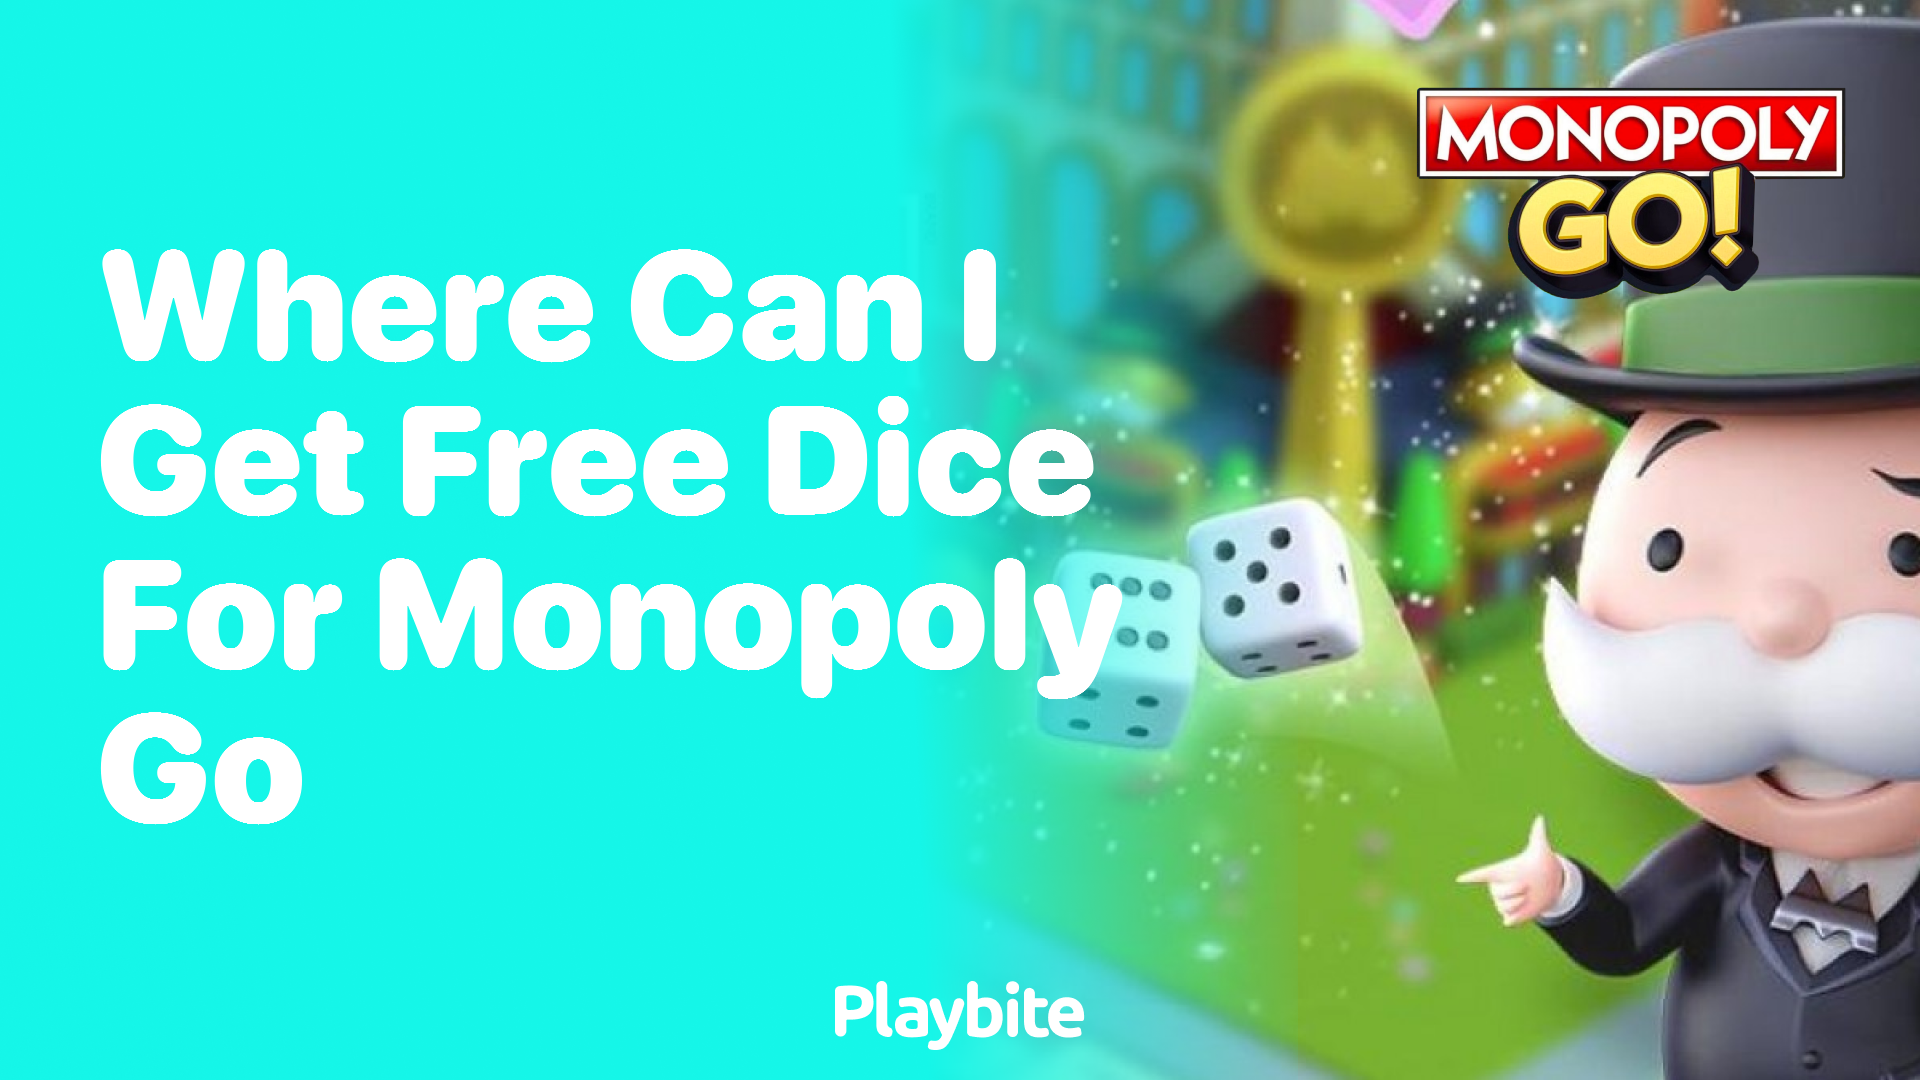 Where Can I Get Free Dice for Monopoly Go?